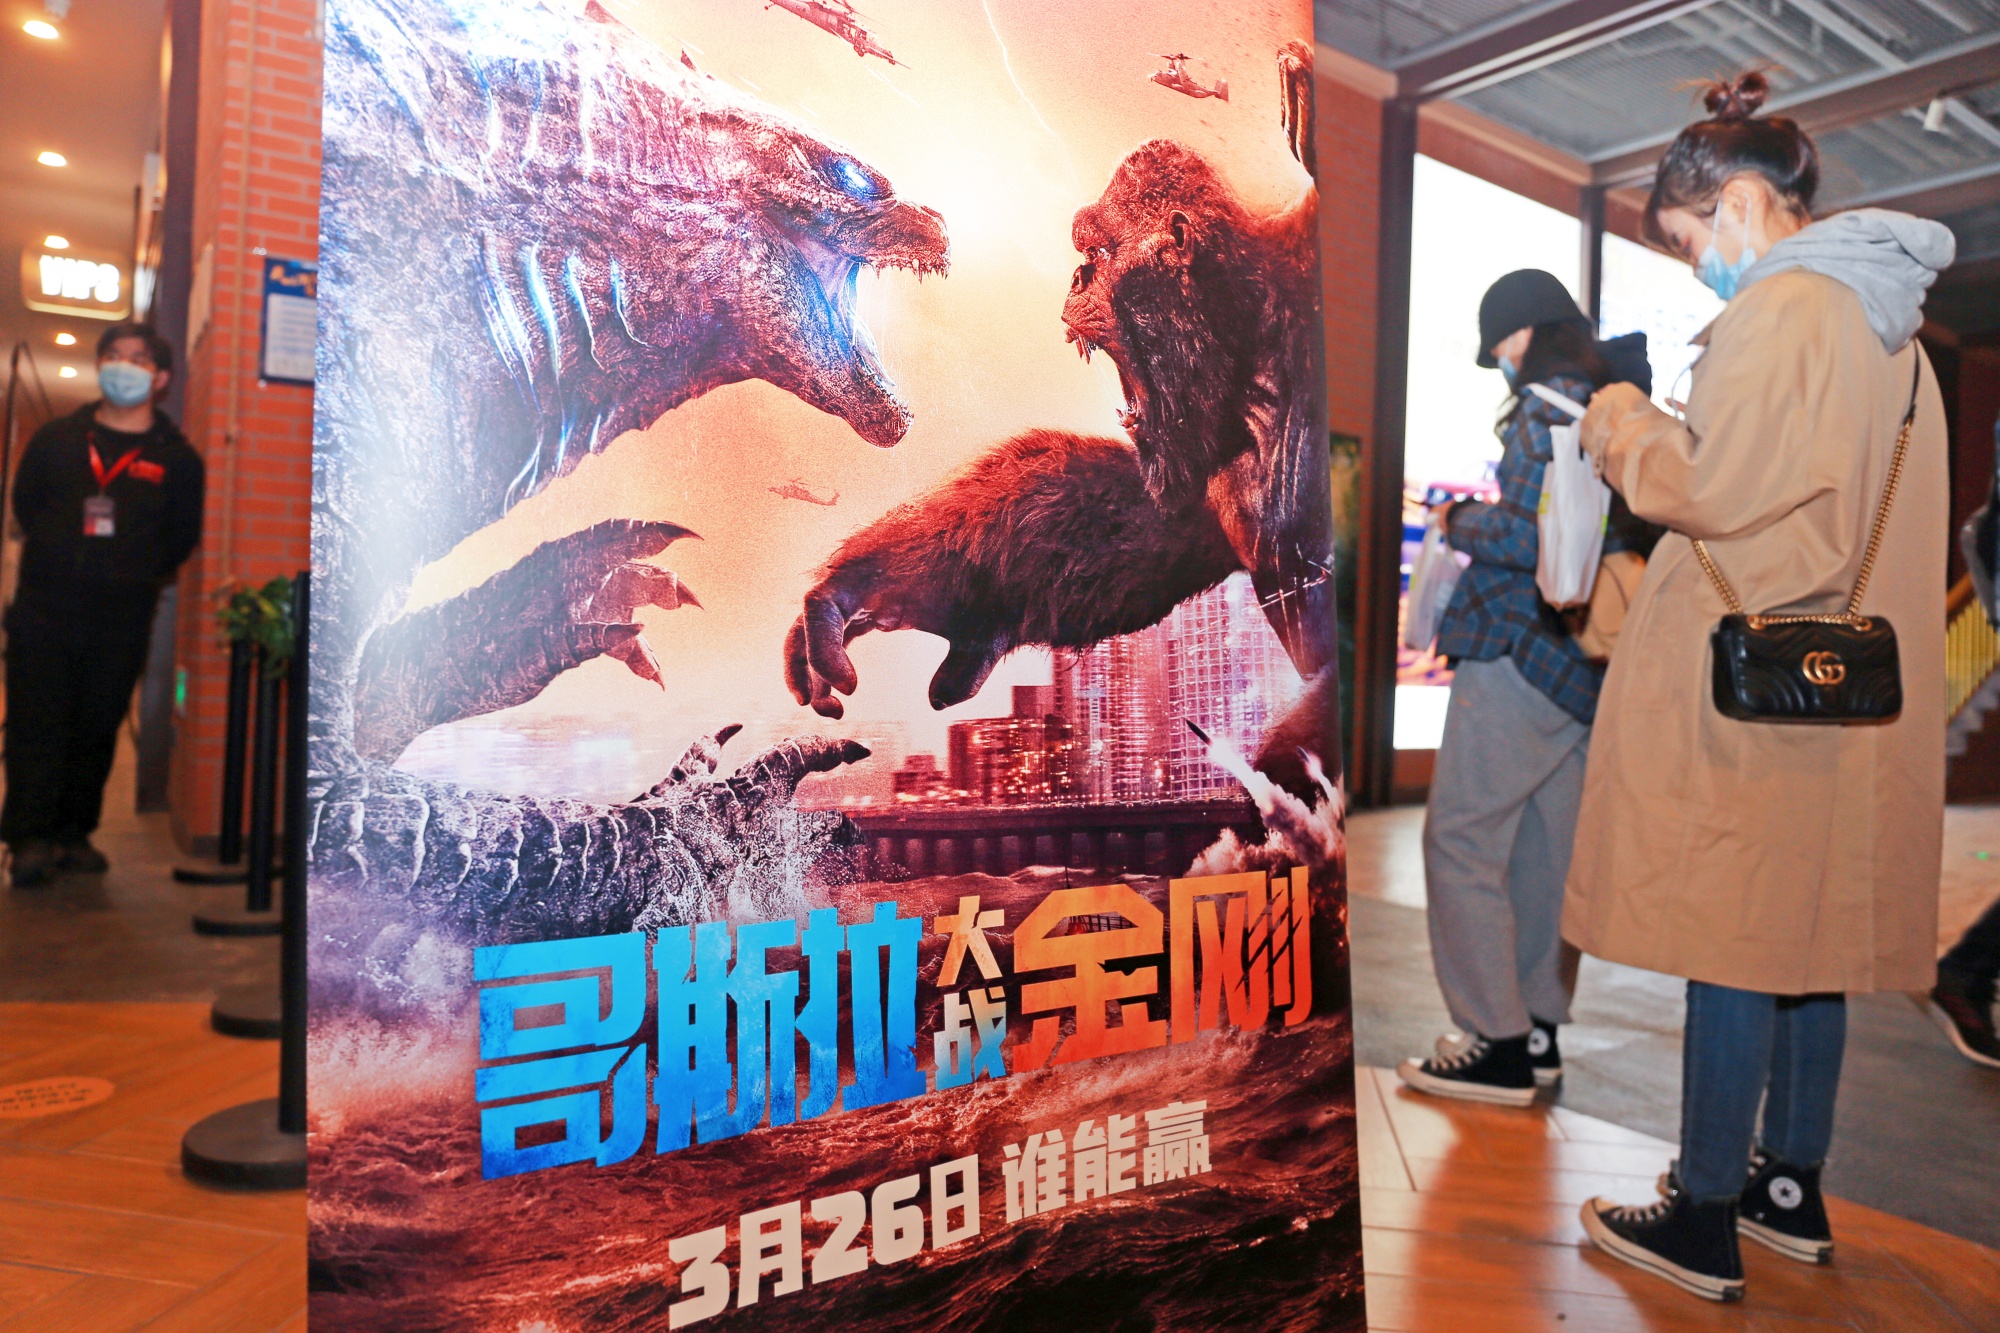 The monster film ‘Godzilla vs. Kong’ showing at a cinema in Shanghai in March 2021.